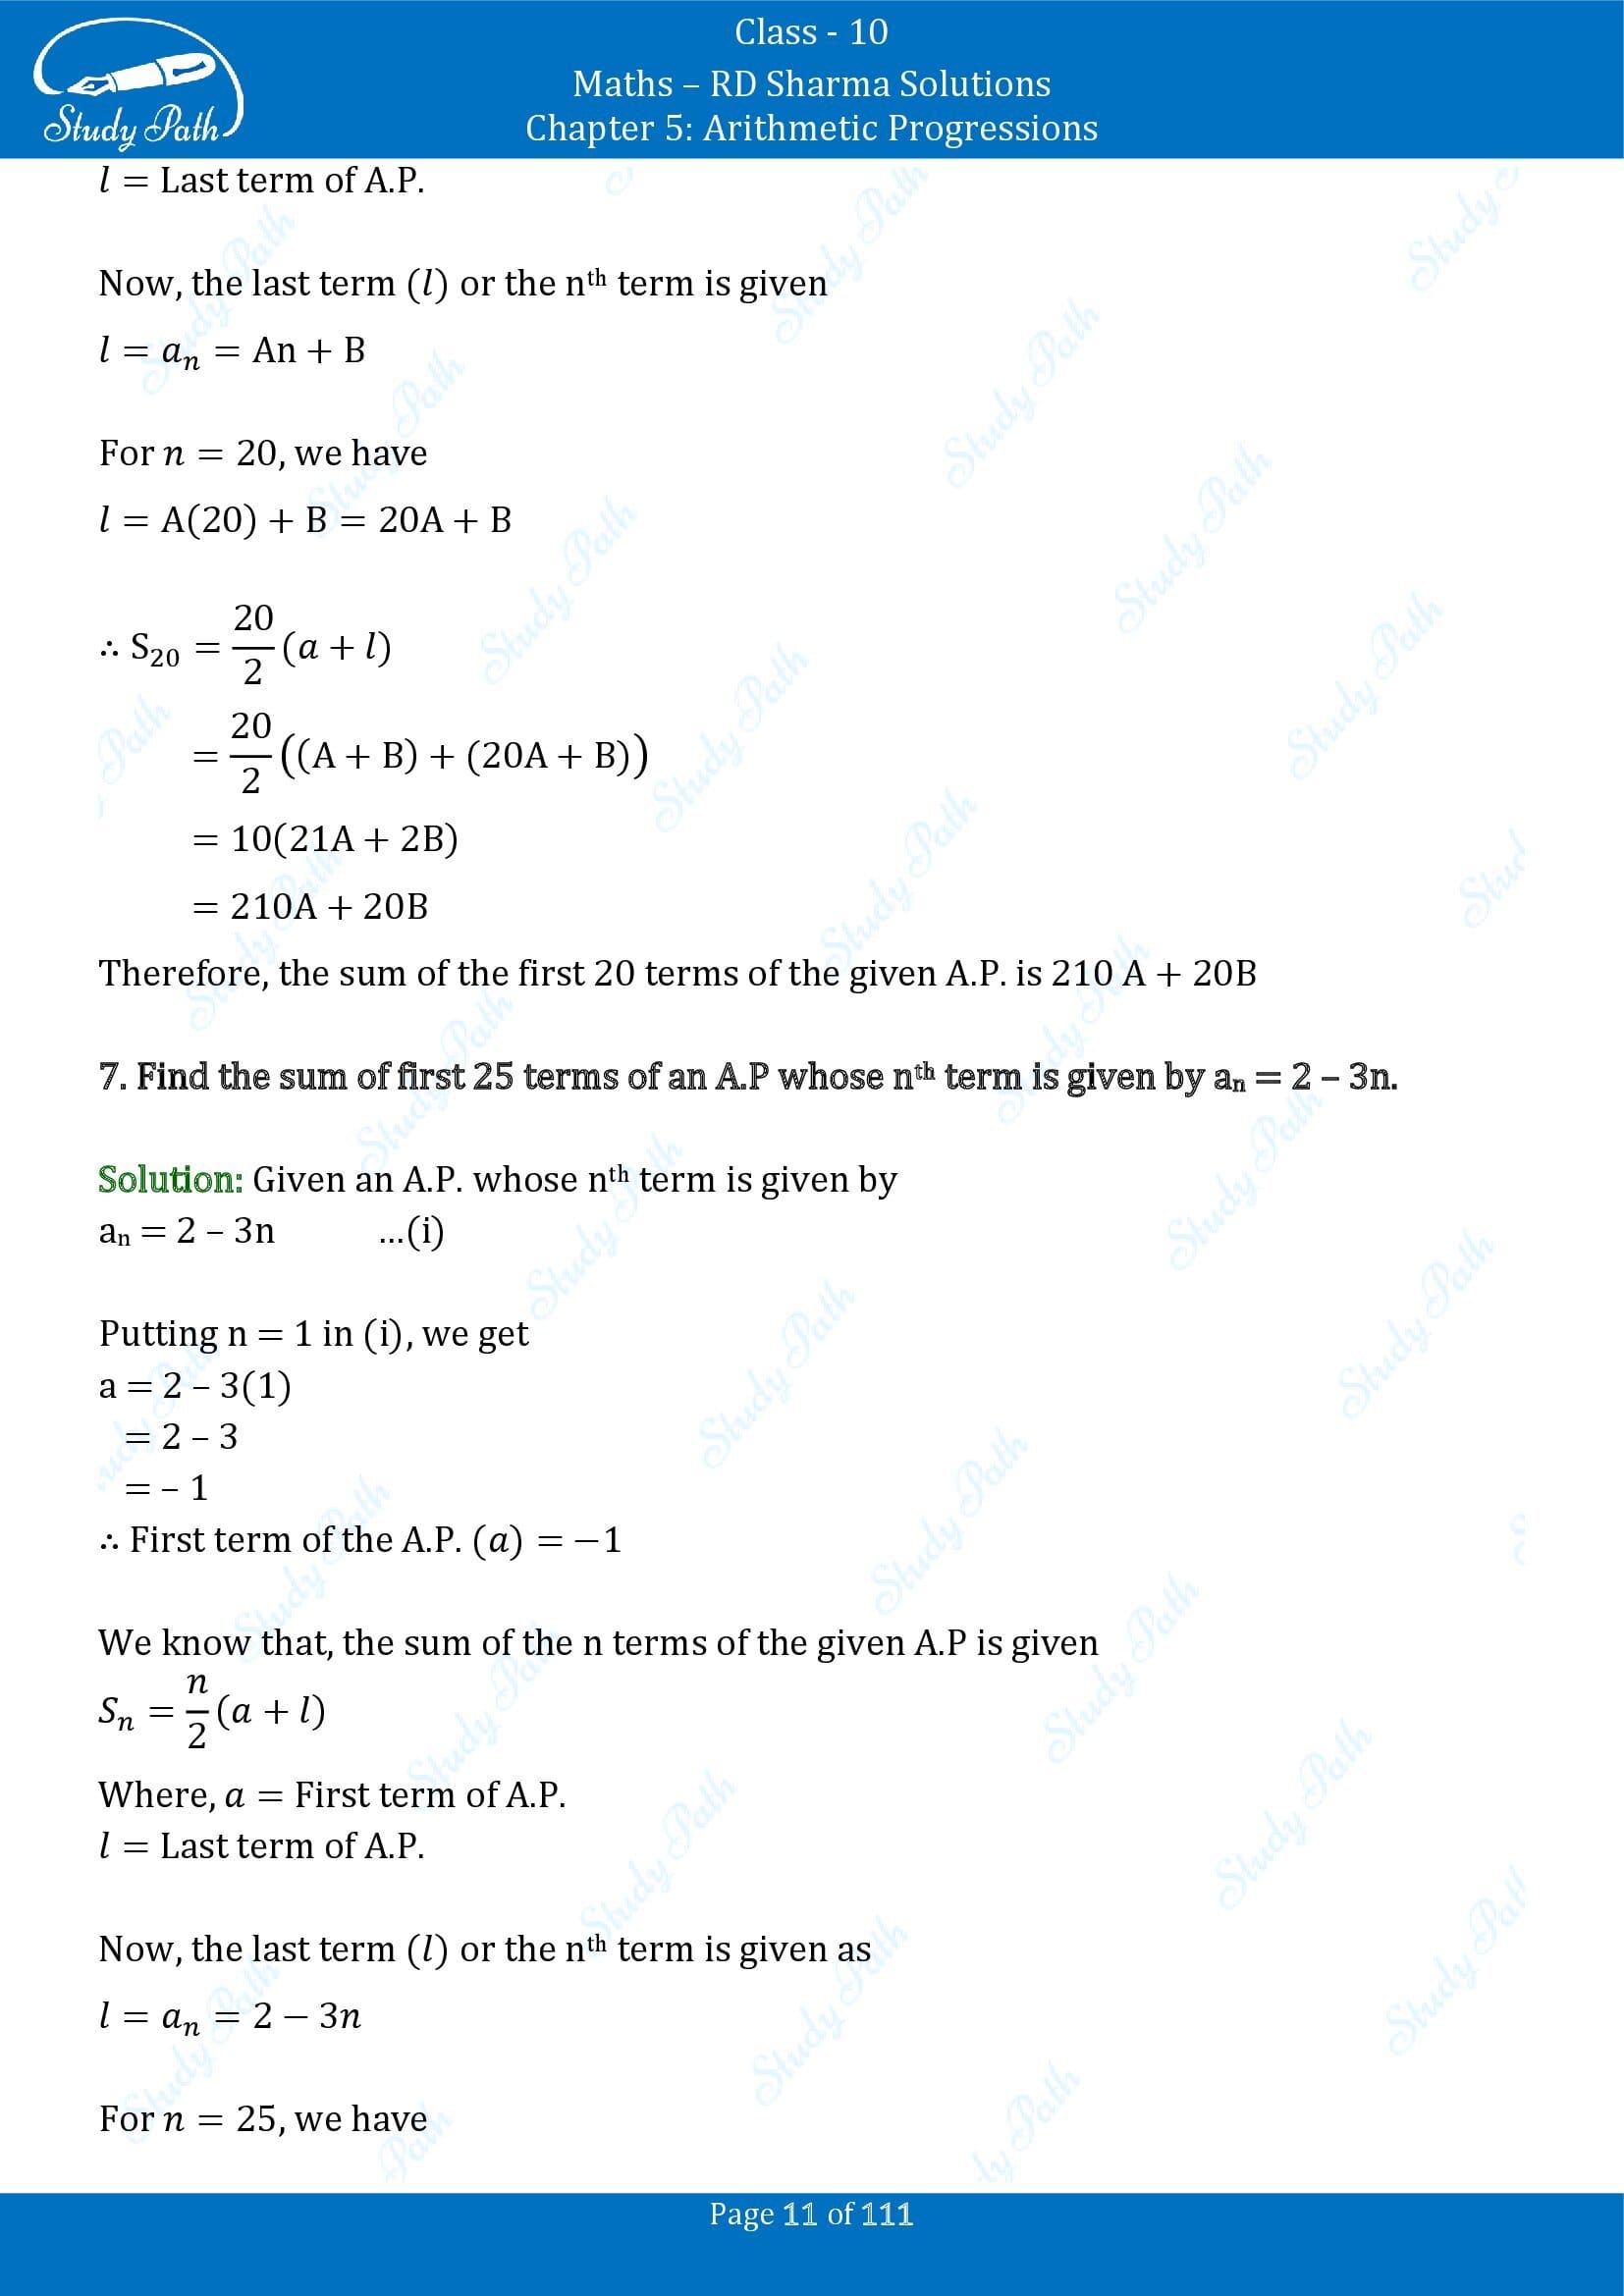 RD Sharma Solutions Class 10 Chapter 5 Arithmetic Progressions Exercise 5.6 00011